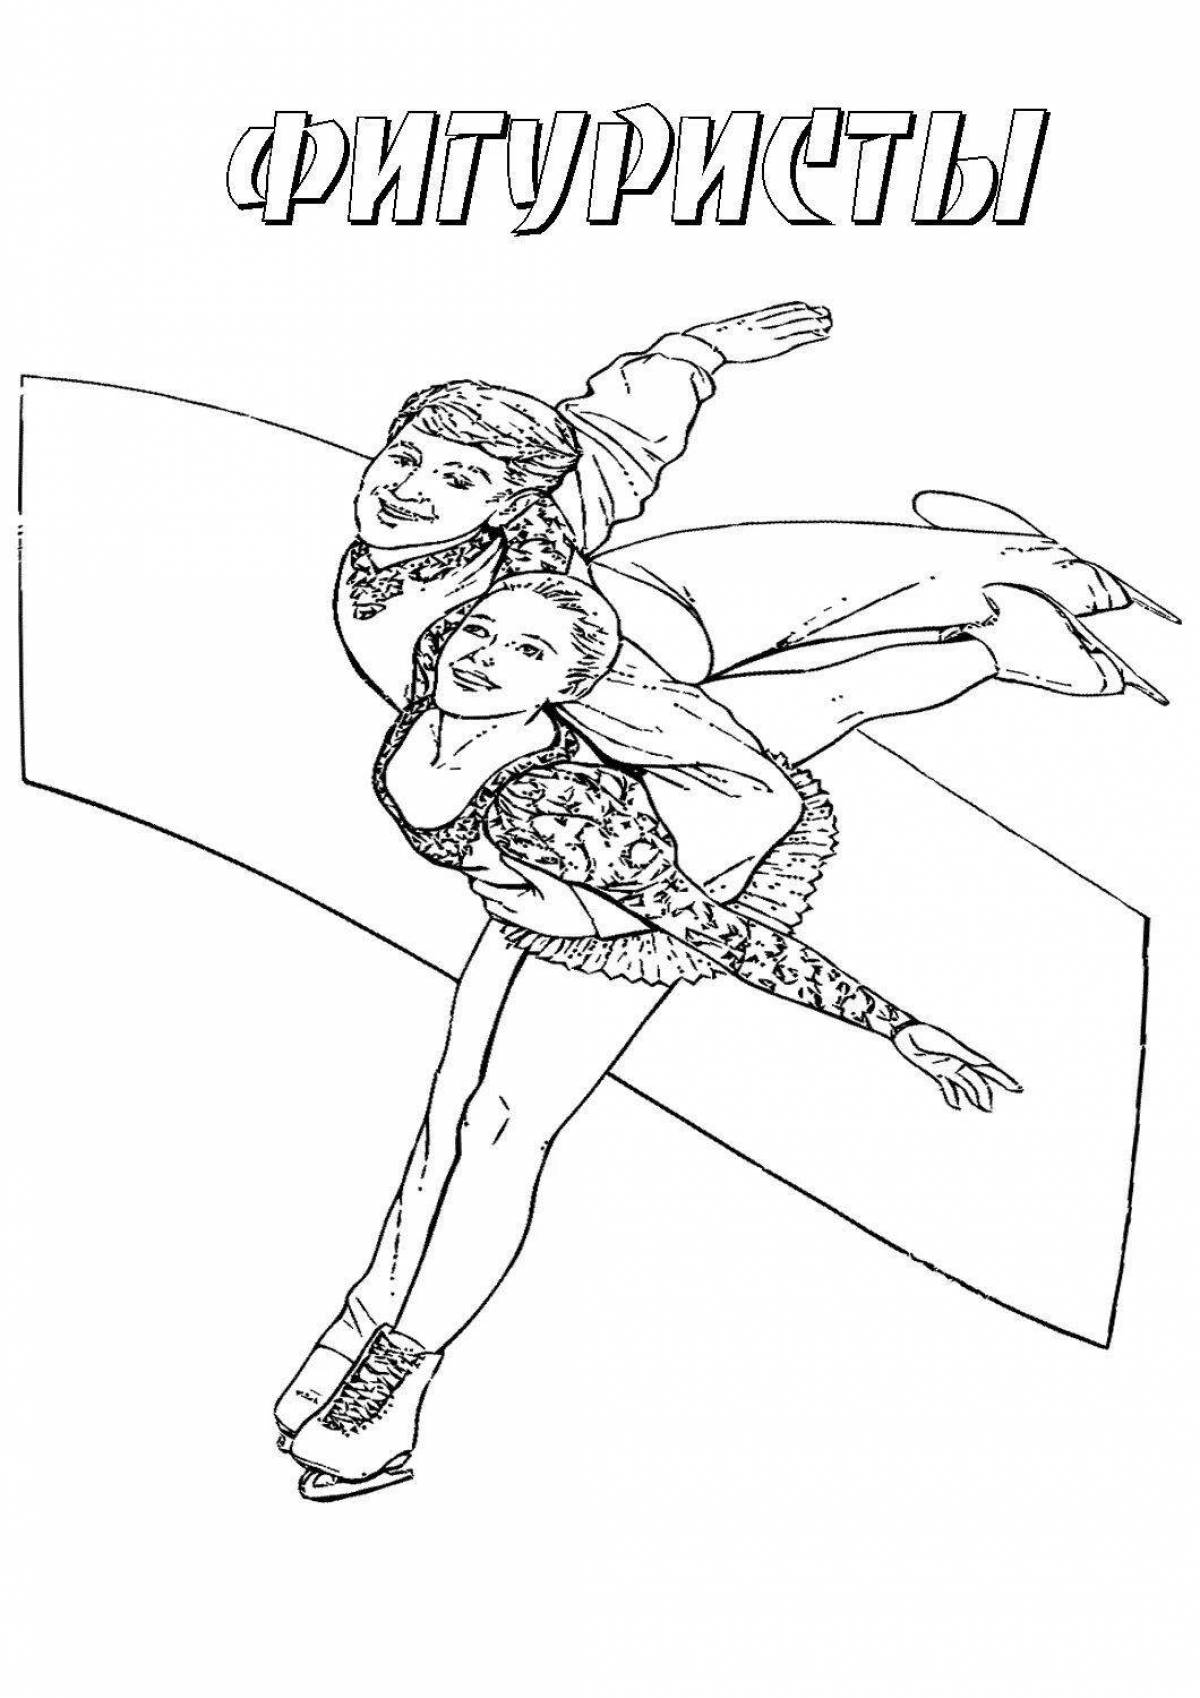 Colorful figure skater coloring page for kids